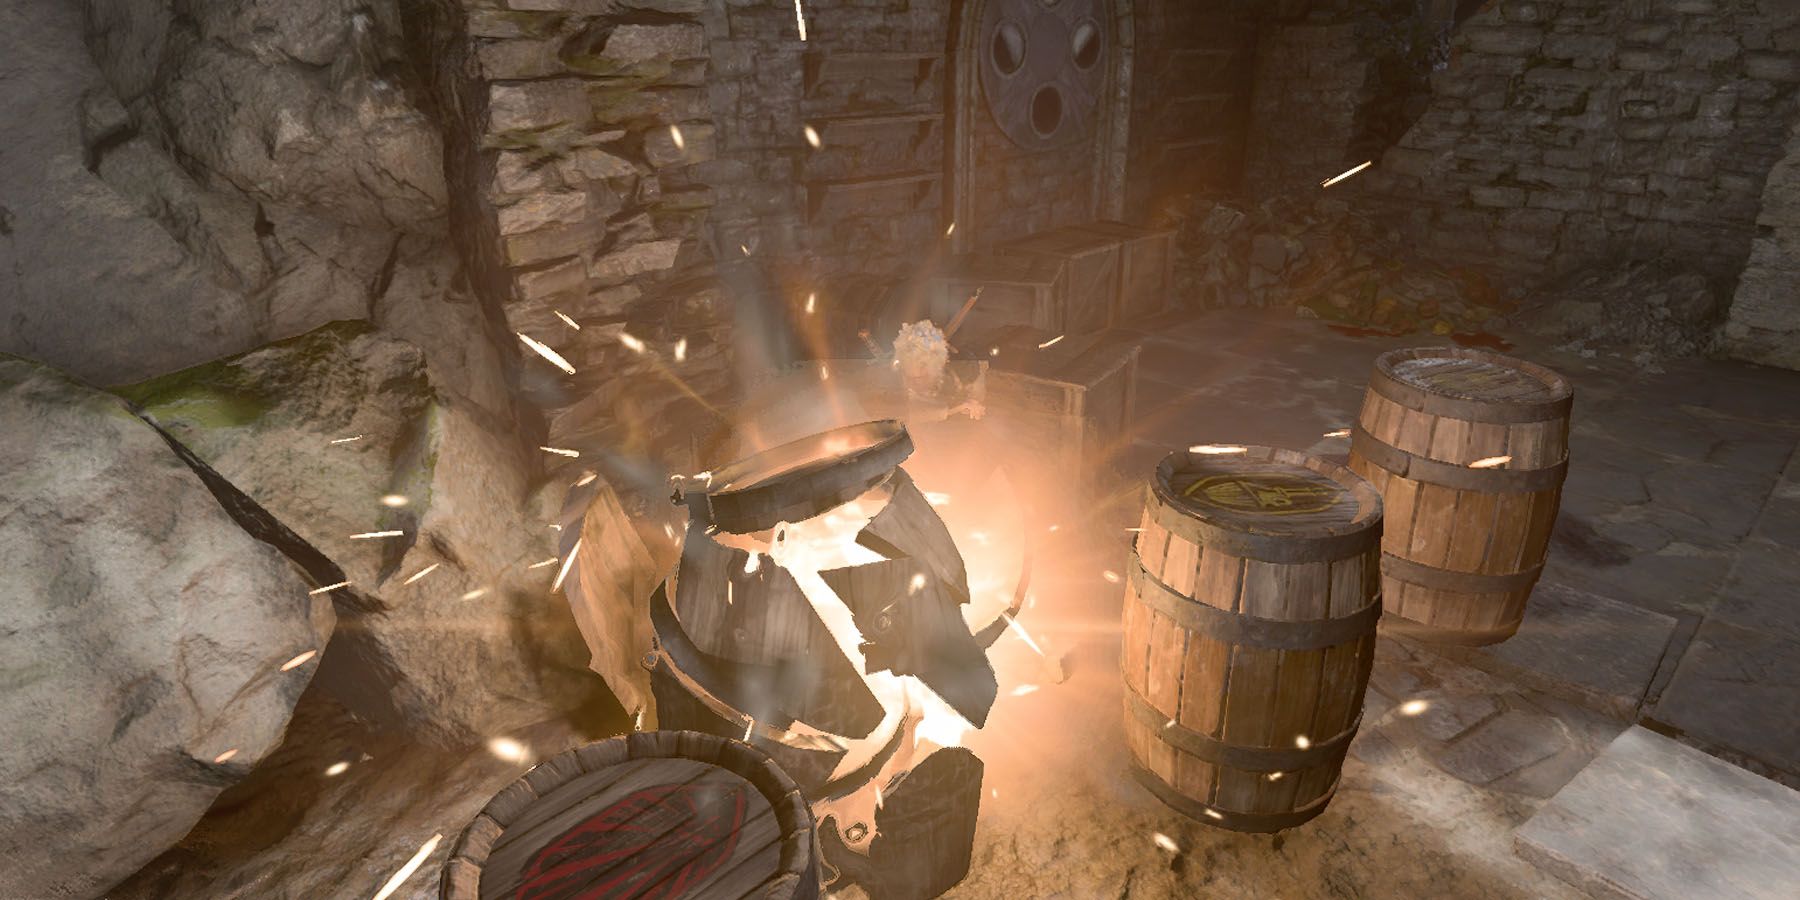 Attacking a barrel that is about to cause an explosion